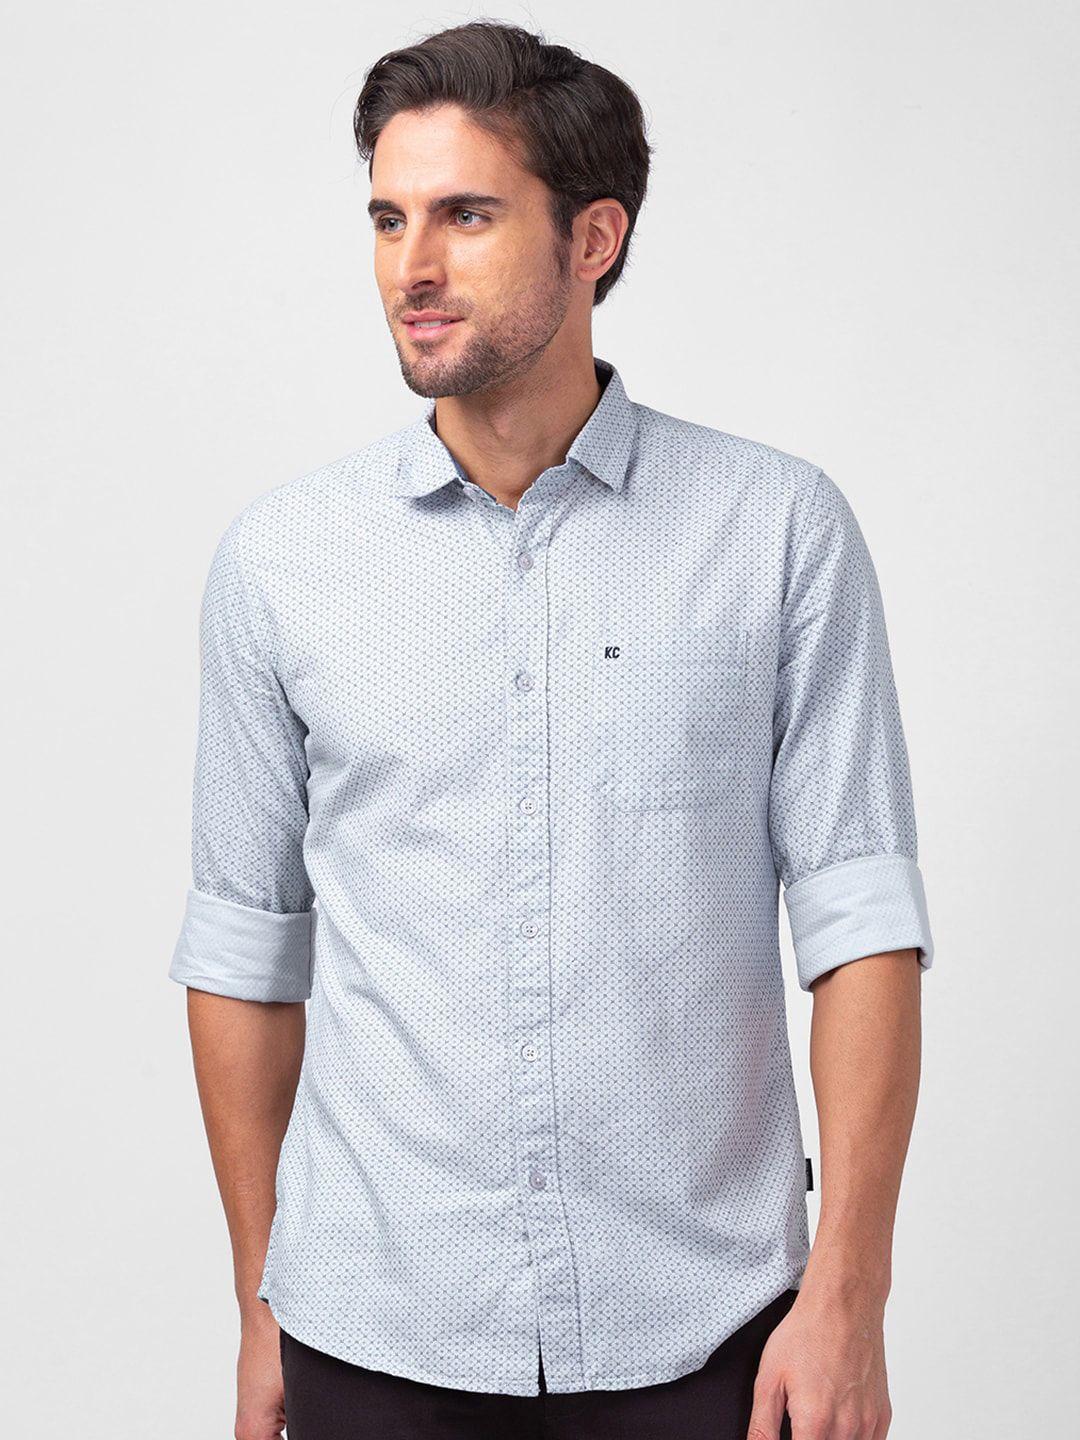 kenneth-cole-men-cotton-slim-fit-printed-casual-shirt